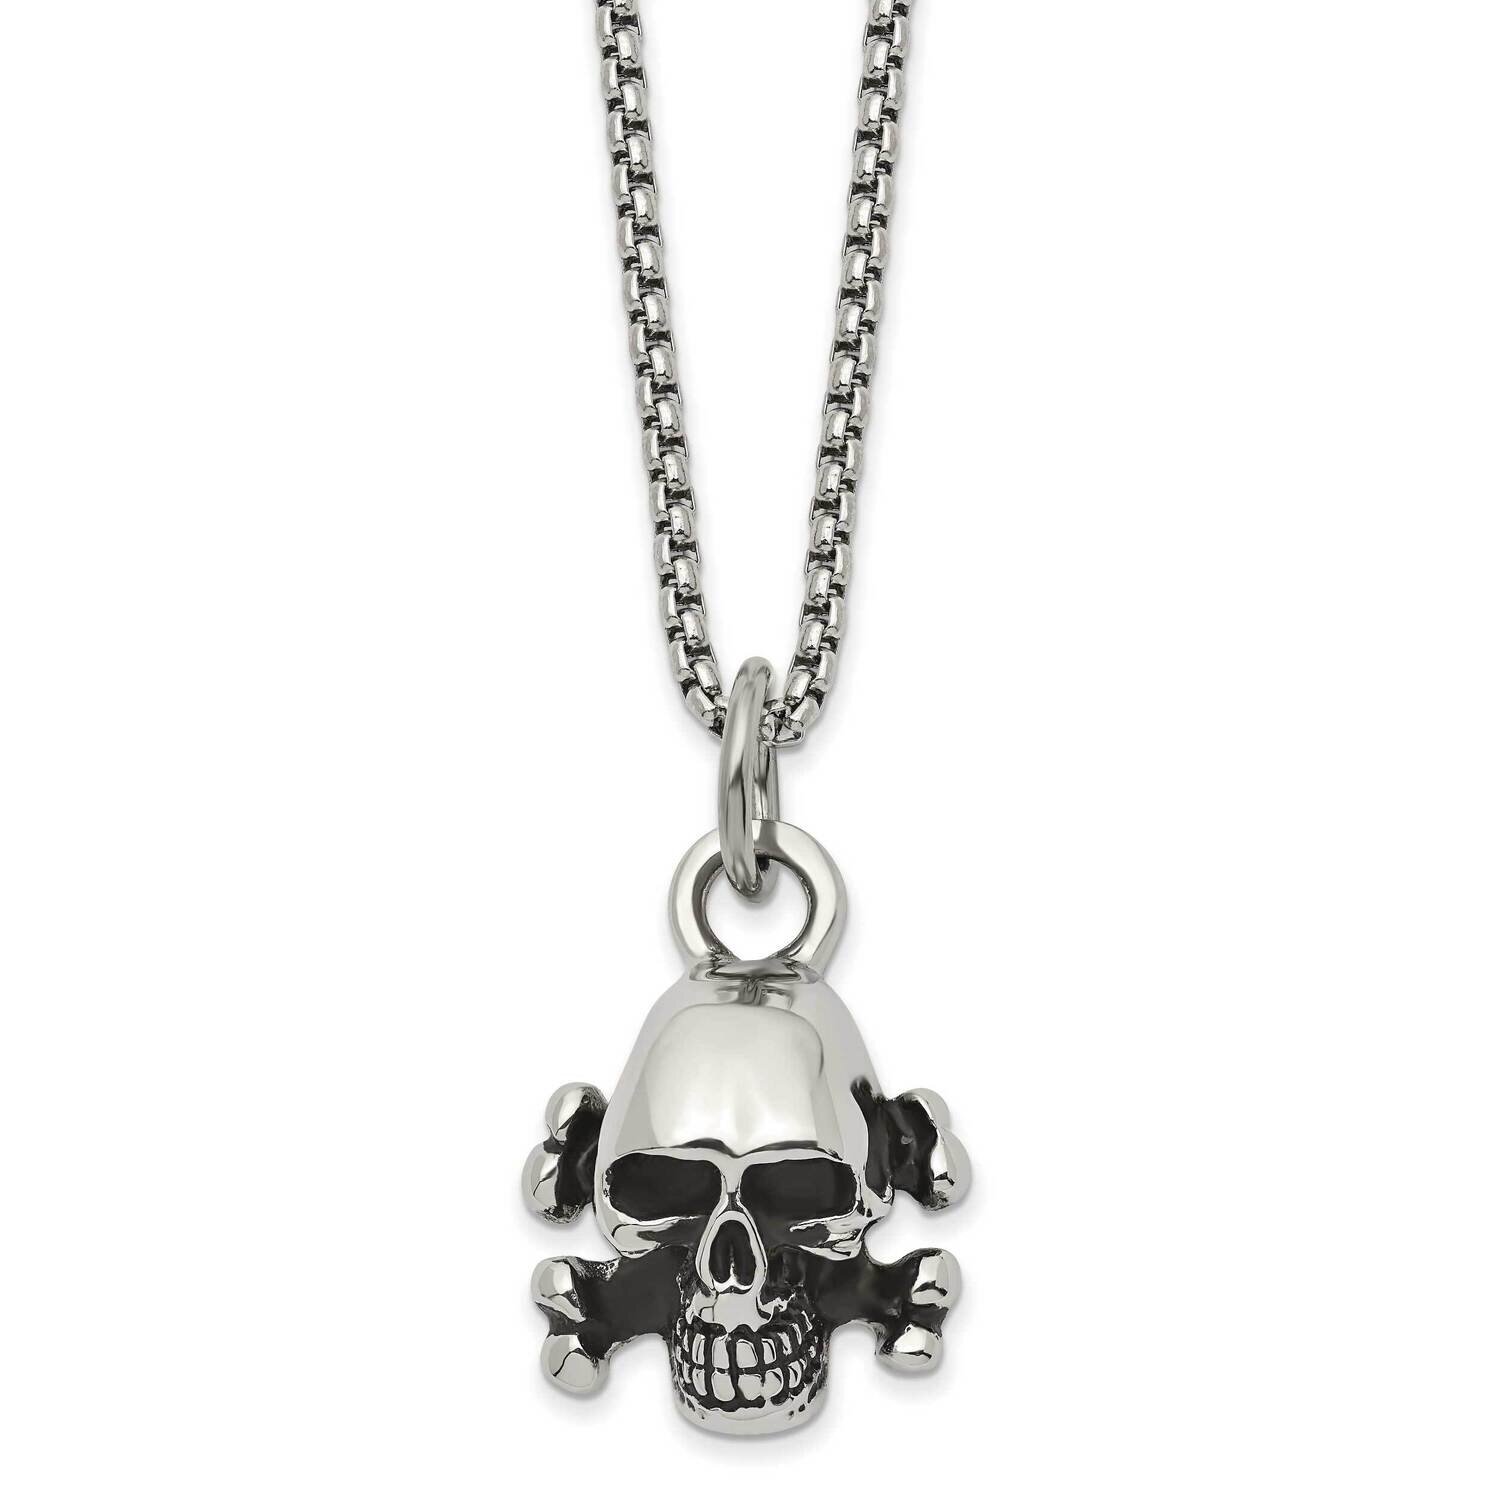 Antiqued and Polished Skull and Cross Bones 24 Inch Necklace Stainless Steel SRN2854-24